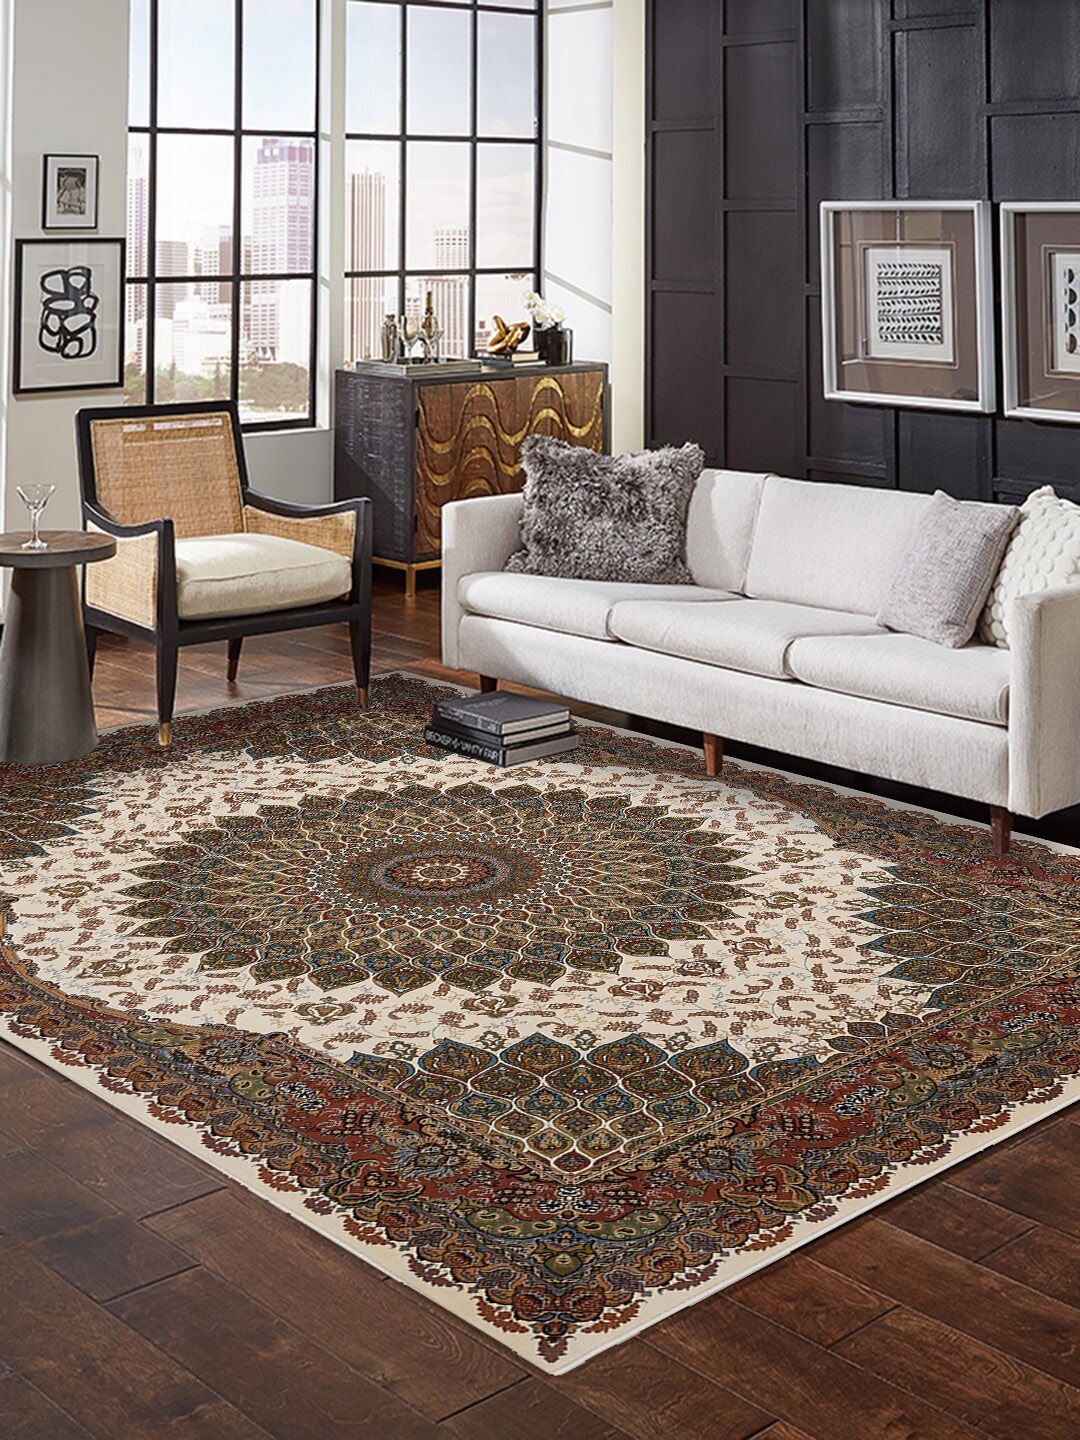 DDecor Brown Ethnic Motifs Printed Carpets Price in India